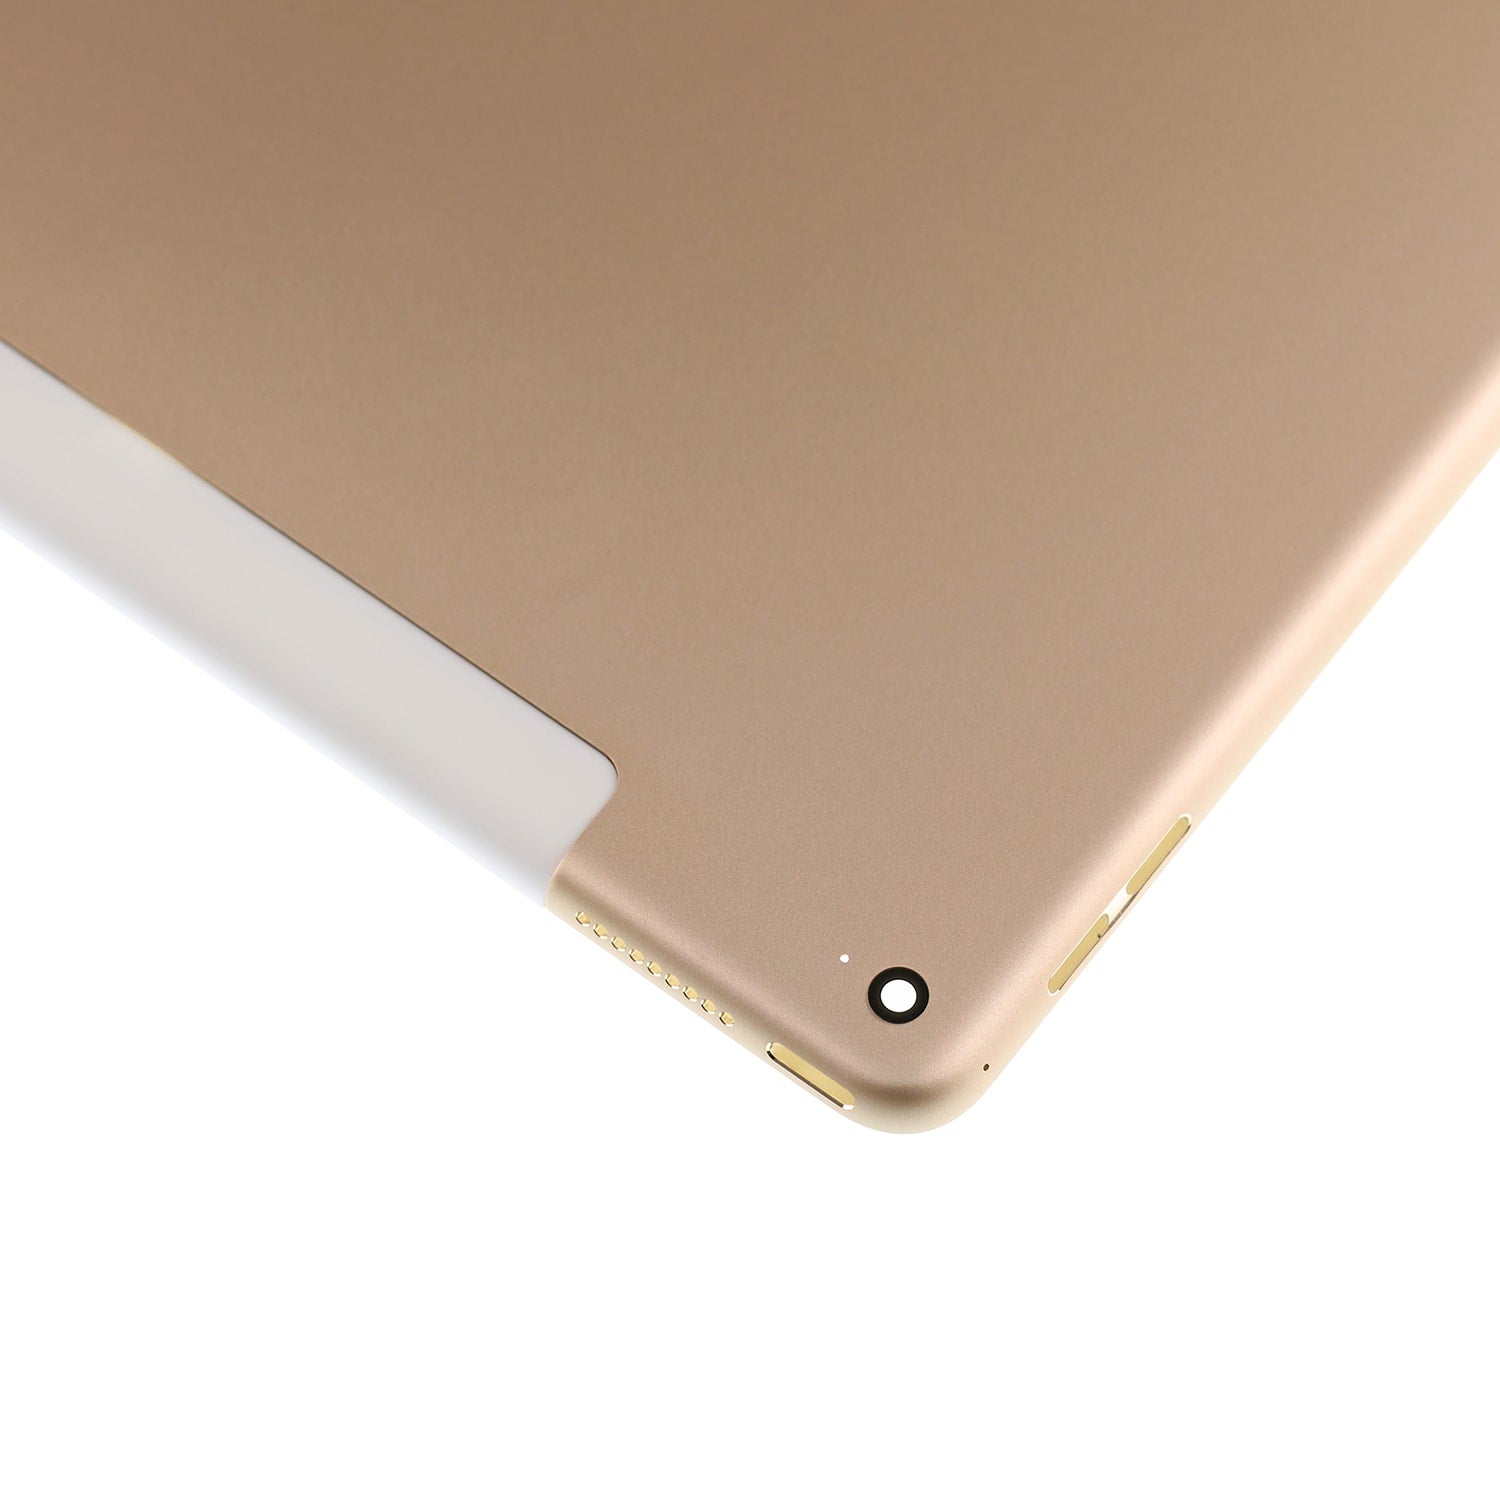 BACK COVER WIFI + CELLULAR VERSION FOR IPAD PRO 12.9" 1ST GEN- GOLD